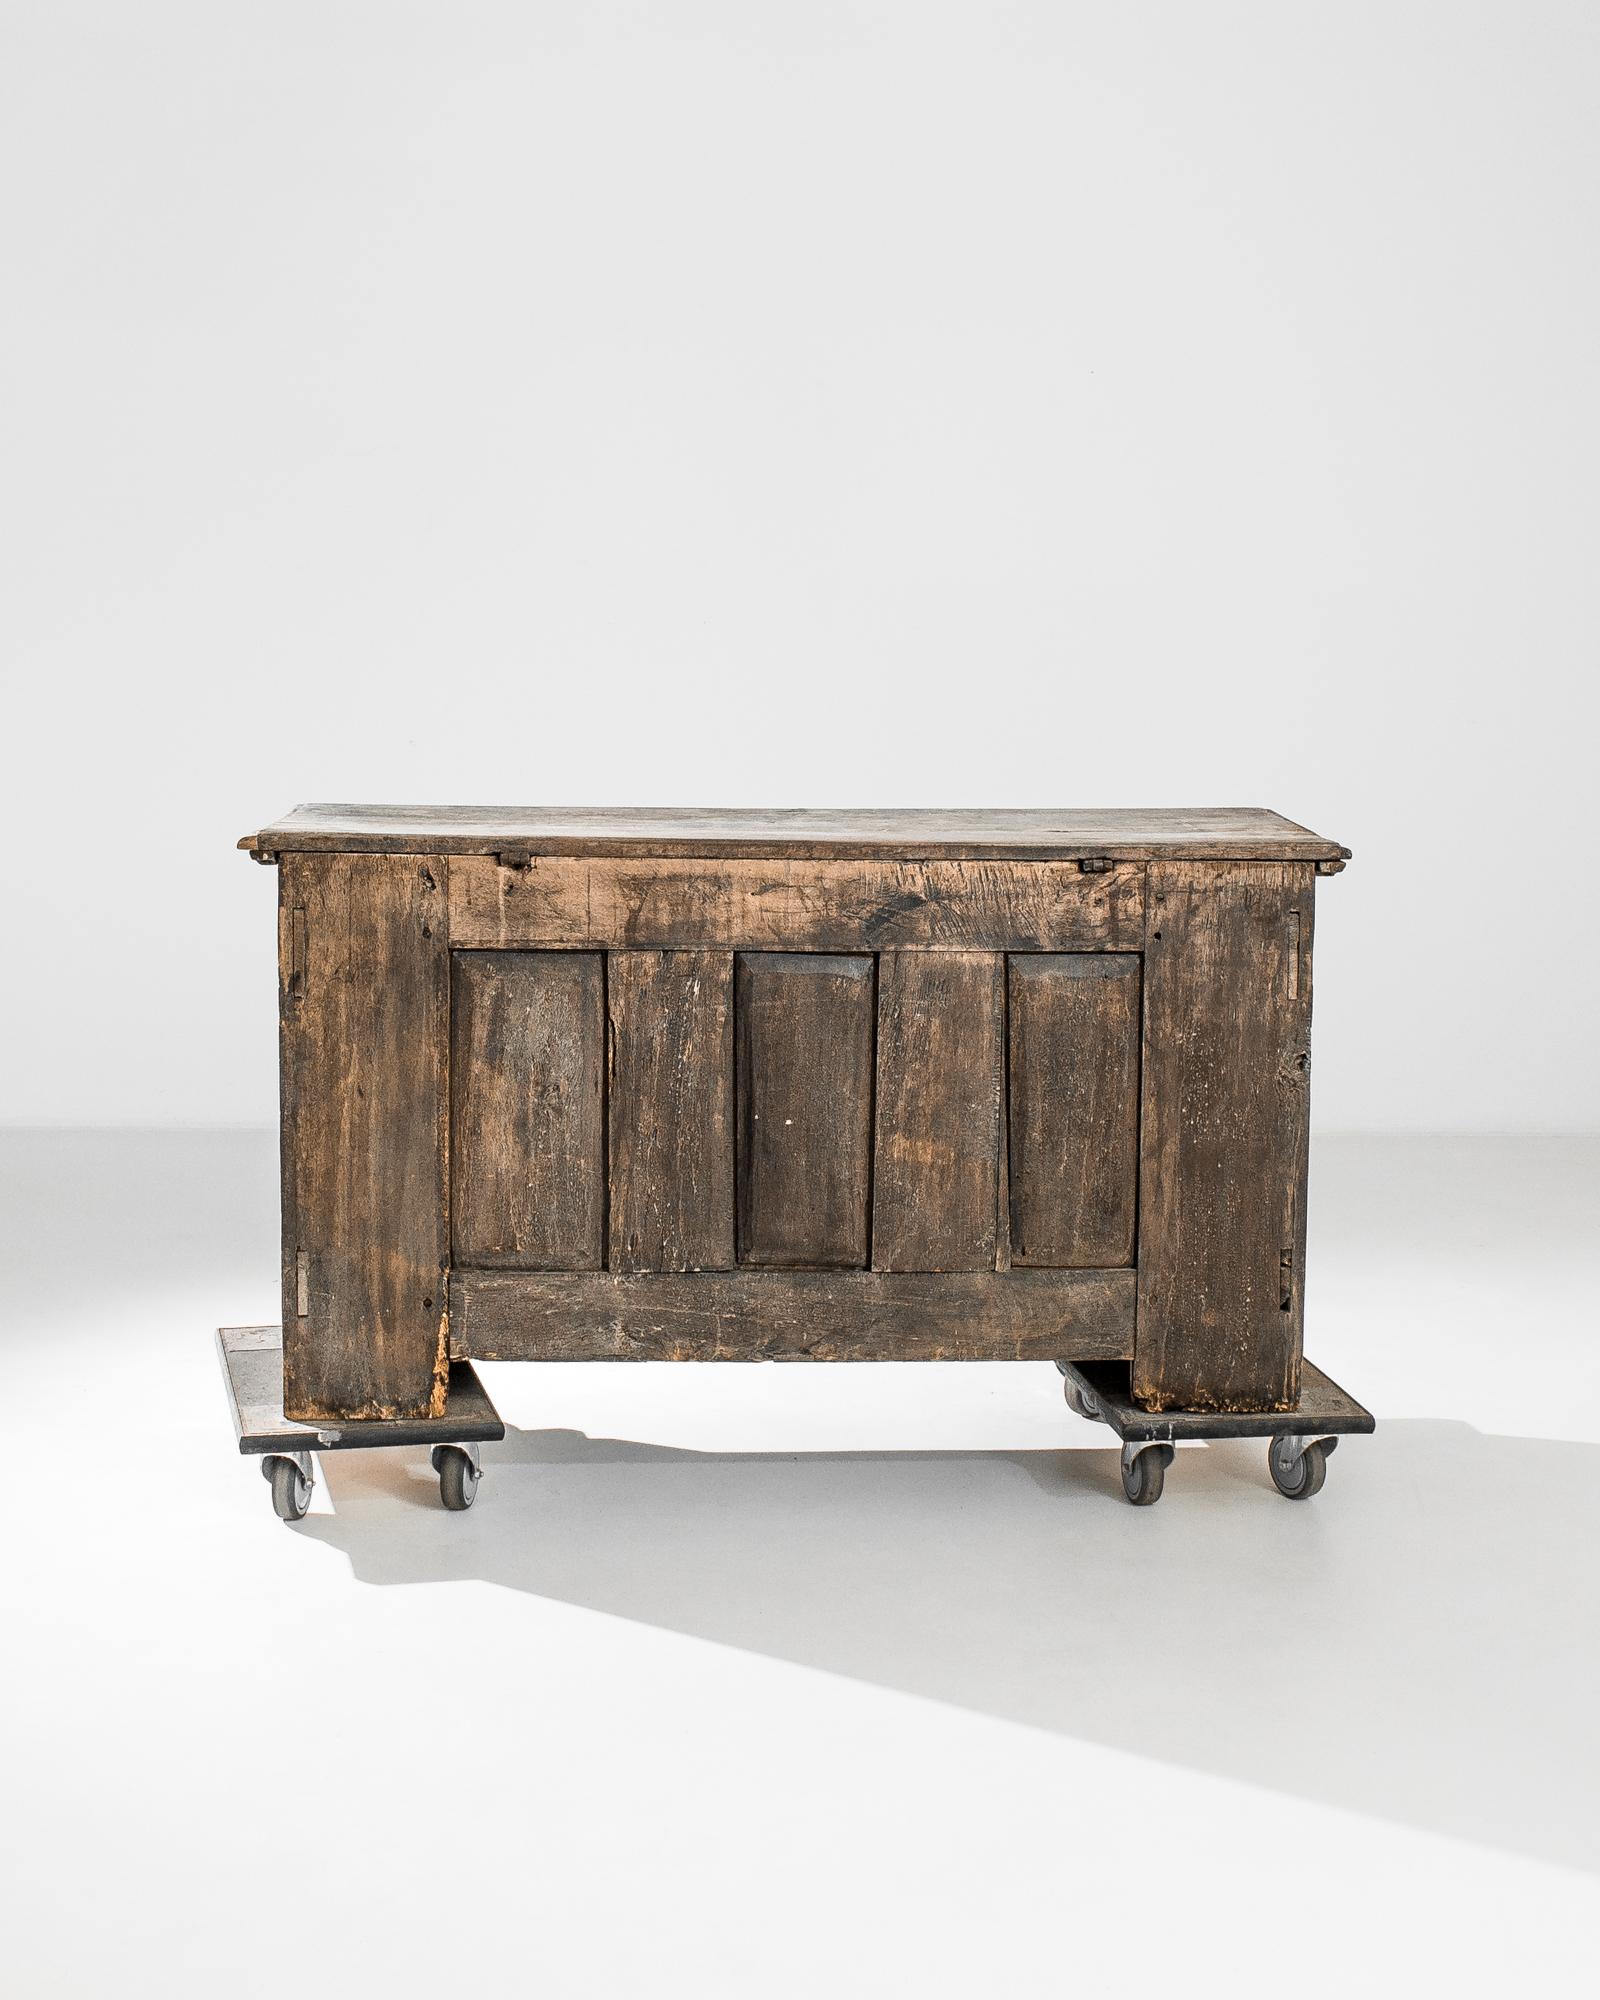 A bleached oak trunk from Germany, produced circa 1760. An antique wooden chest featuring a hinged lid with chain support and original locking iron latch and key. Decorated with geometric panels in relief at the flanks, and raised curved diamonds on